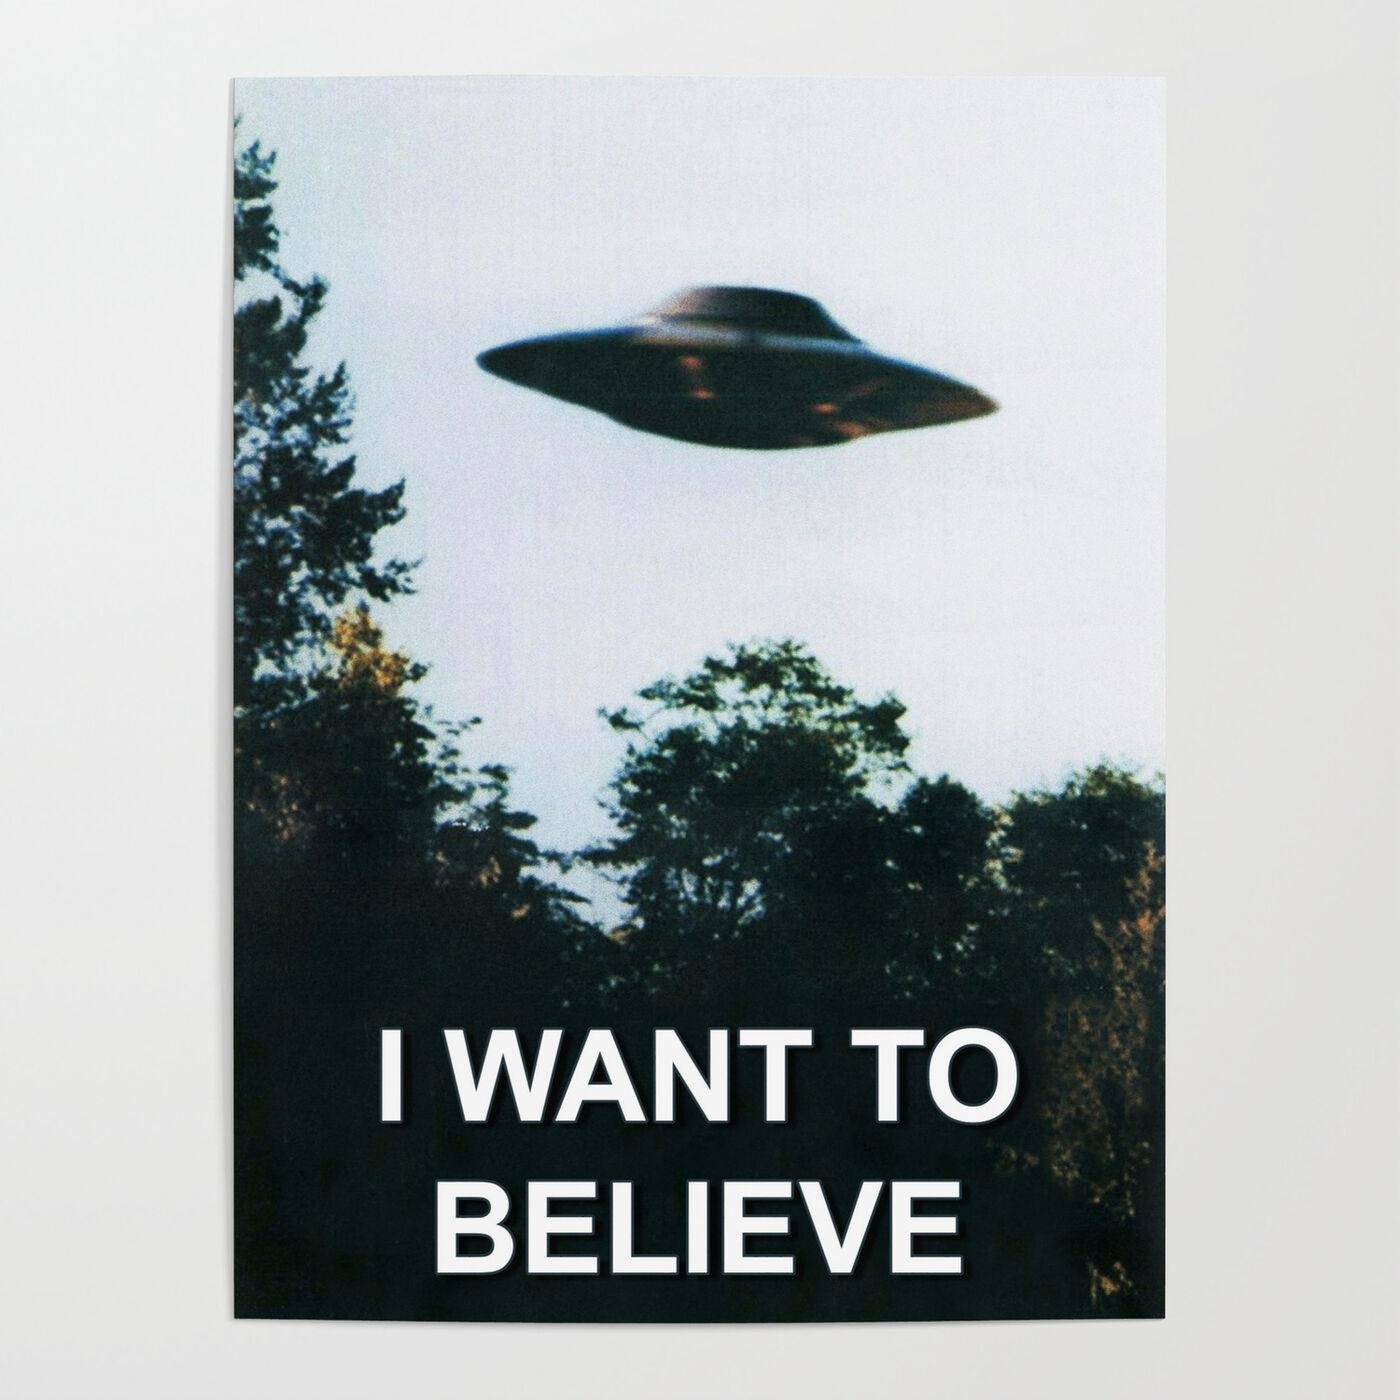 This year i want. Летающая тарелка i want to believe. Постер i want to believe. I want to believe утопия шоу. Плакат с НЛО I want to believe.